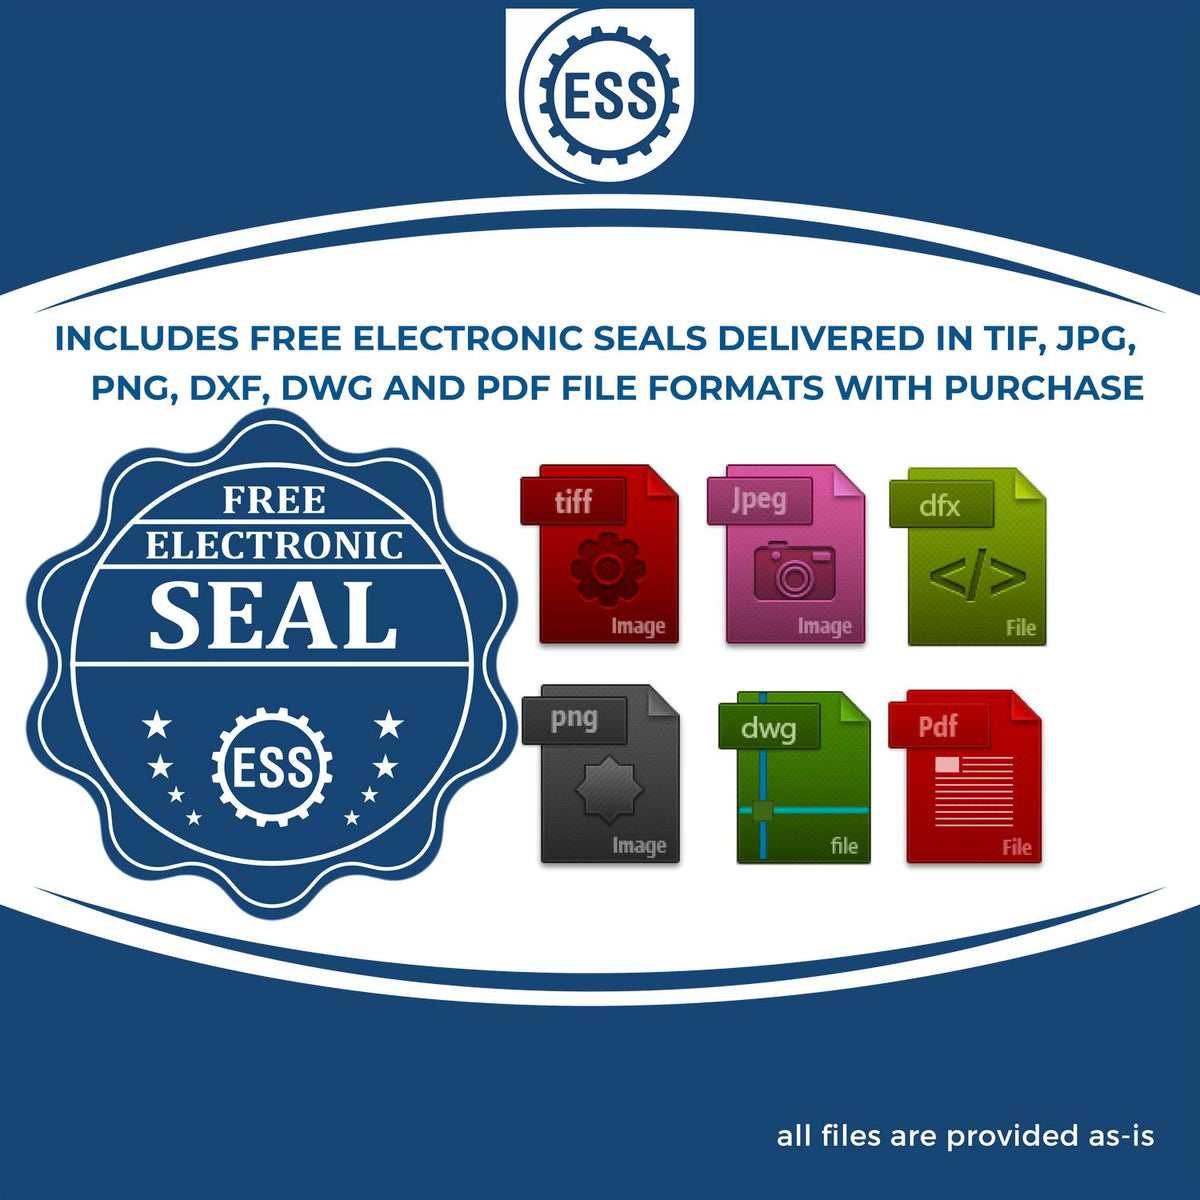 An infographic for the free electronic seal for the Michigan Desk Architect Embossing Seal illustrating the different file type icons such as DXF, DWG, TIF, JPG and PNG.